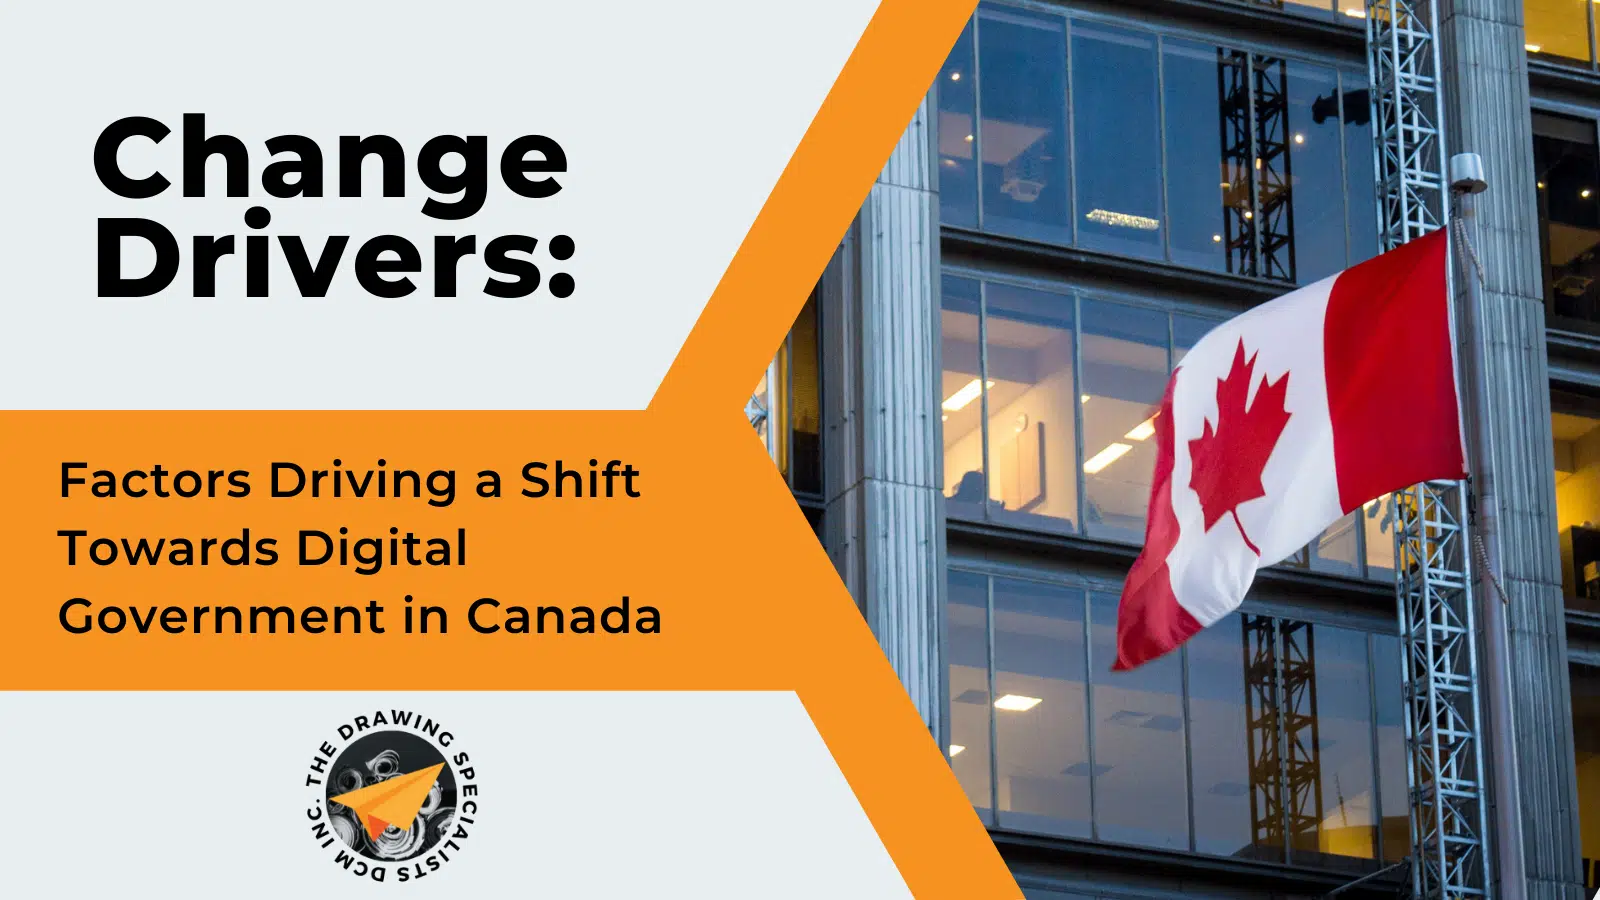 Change Drivers: Factors Driving a Shift Towards Digital Government in Canada